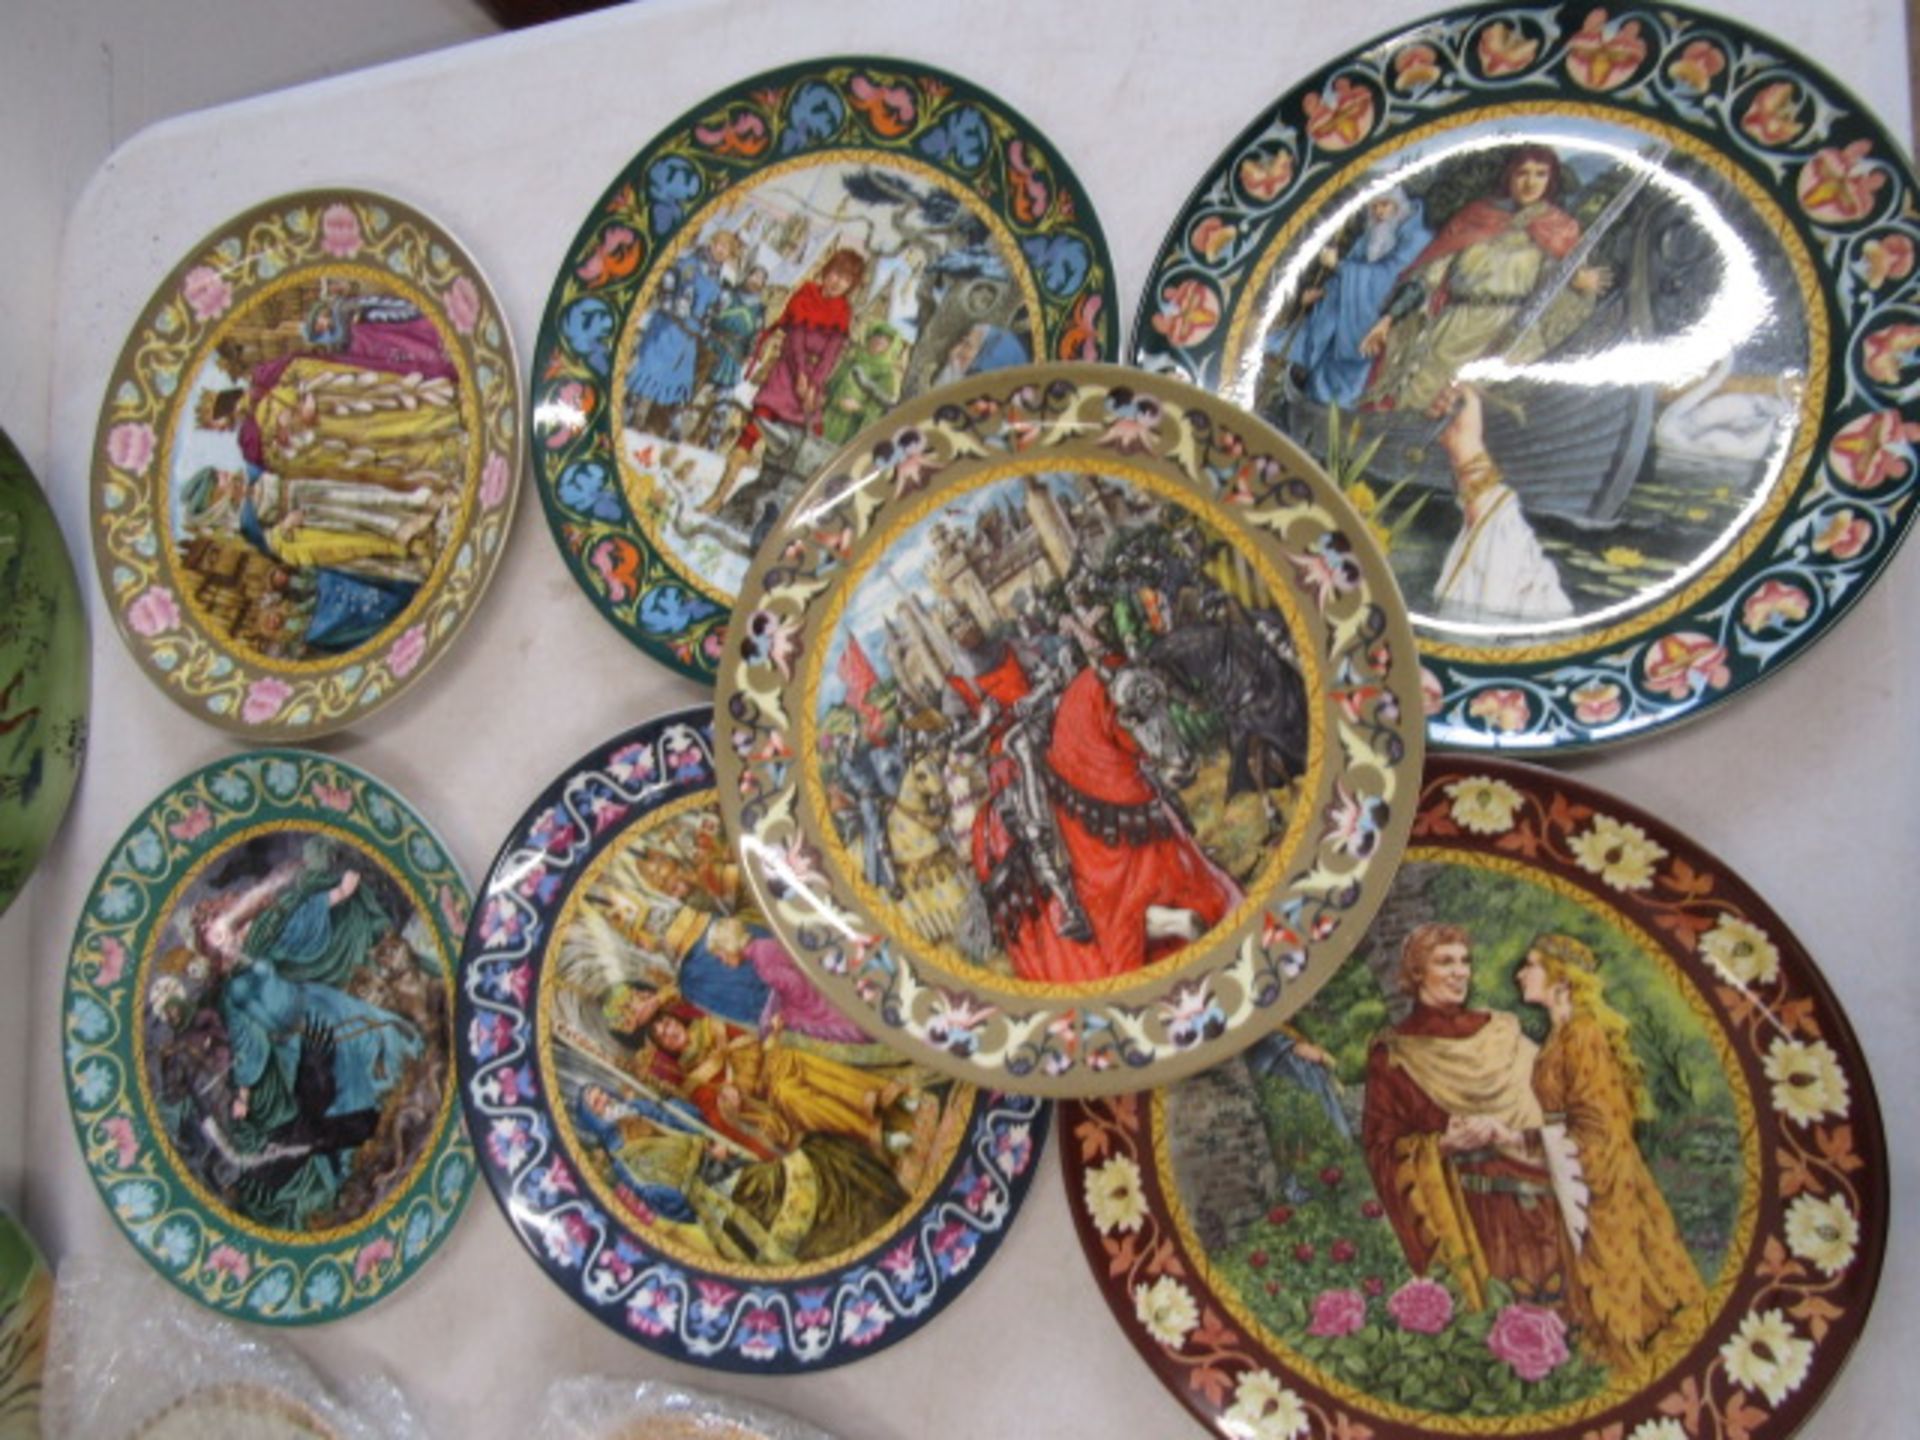 set 12 USSR picture plates, 2 hunting plates, Royal Doulton Red Rum plate etc - Image 7 of 12